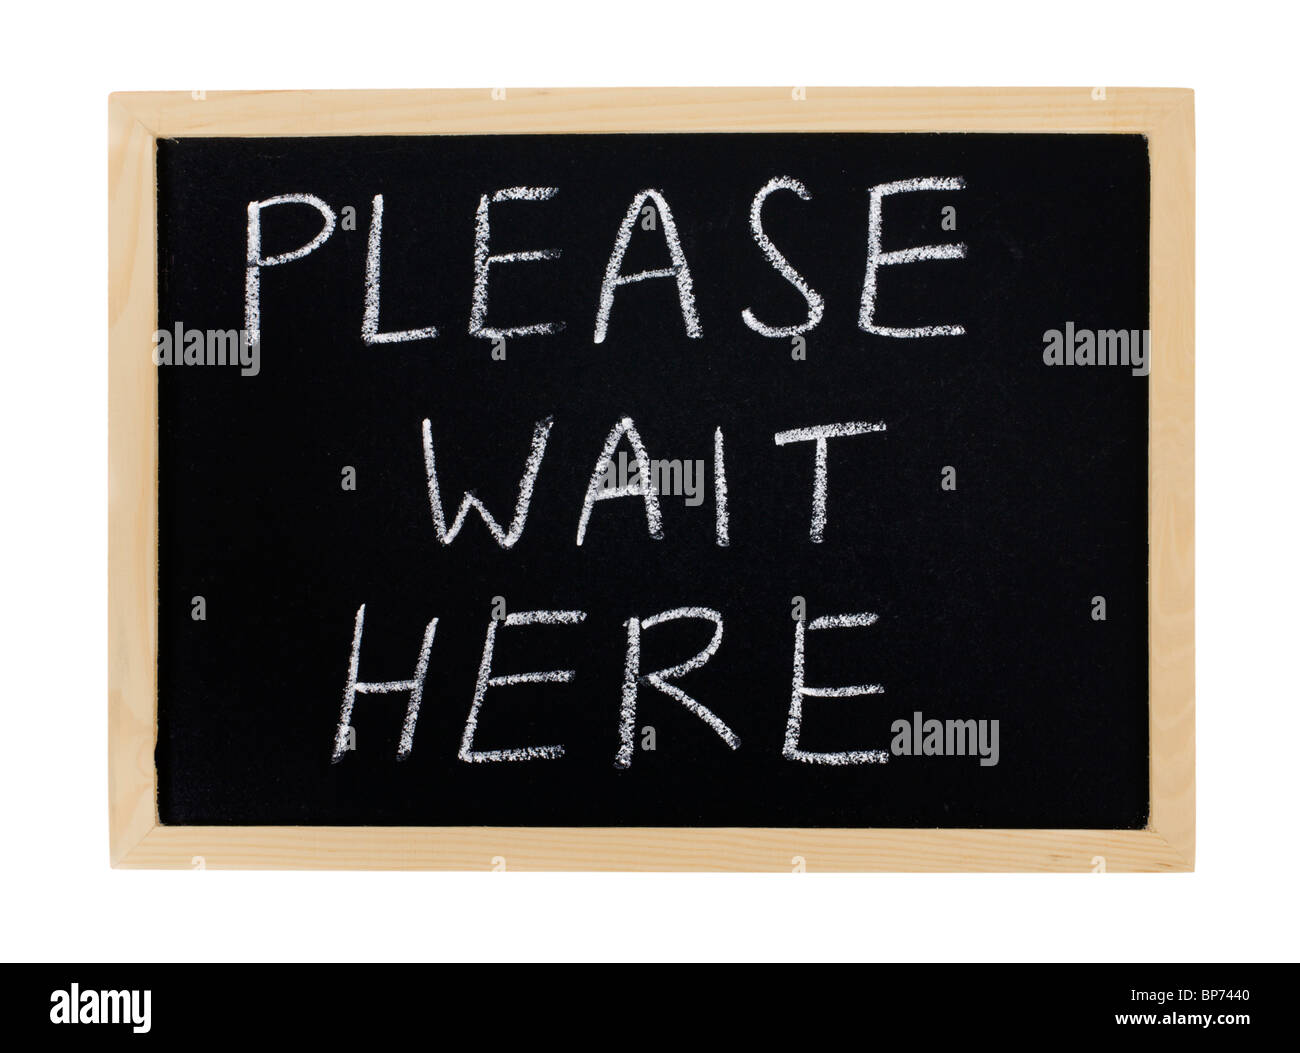 A message, "Please Wait Here" on a chalkboard. Stock Photo